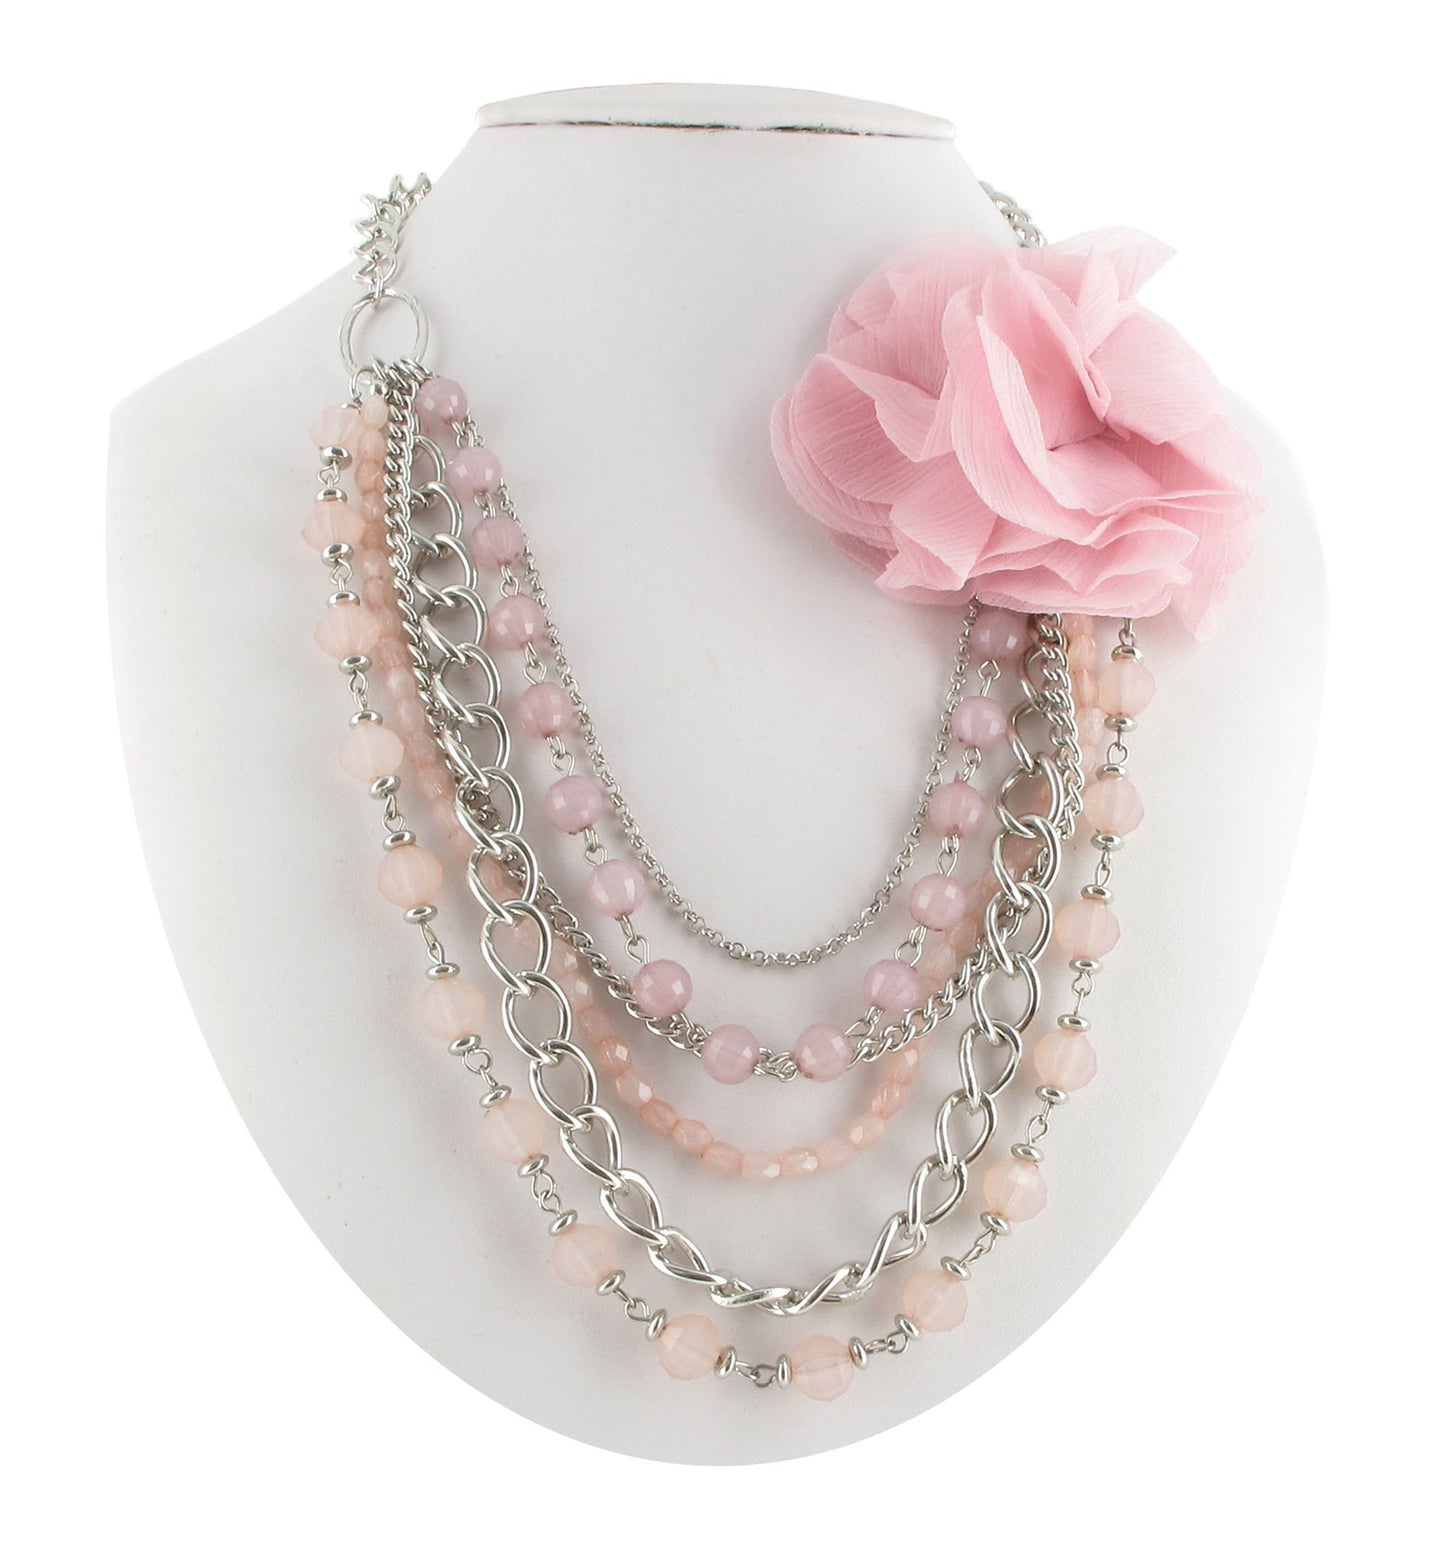 Pink Flower Statement Beaded Silver Tone Chain Layered Multistrand Necklace 23"